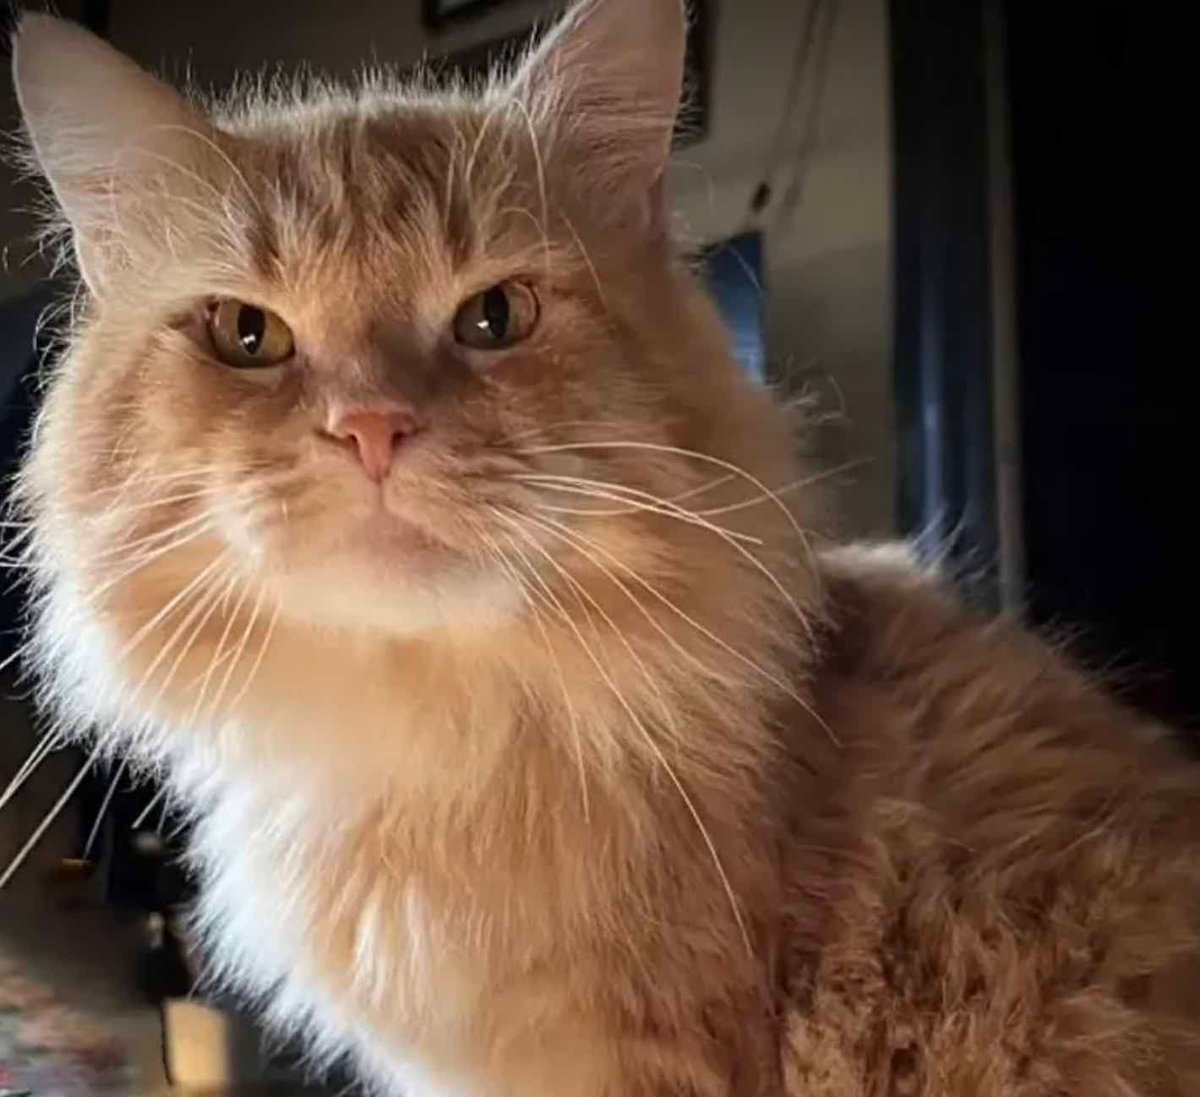 Meet a Half-Blind Stray Cat Who Dreamed of a Better Life – and Found it! Meet Morpheus the cat! This pretty fluffball morphed from a very sick, semi-feral stray cat into the happy couch potato that he is today..... Full story here 👉 buff.ly/42lbqSW